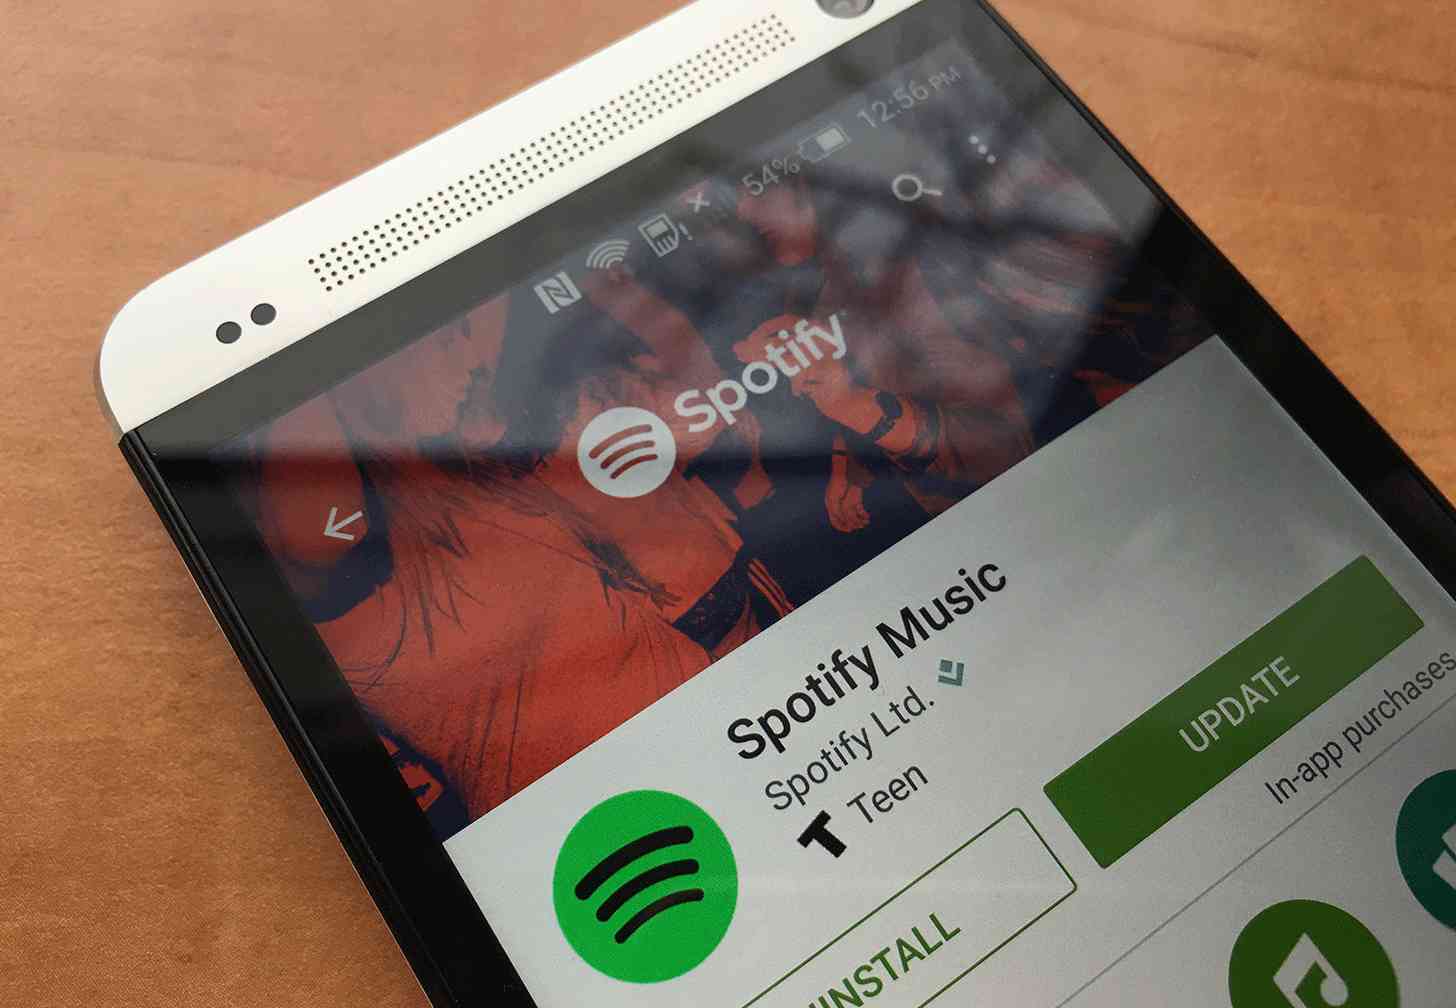 Spotify Android app